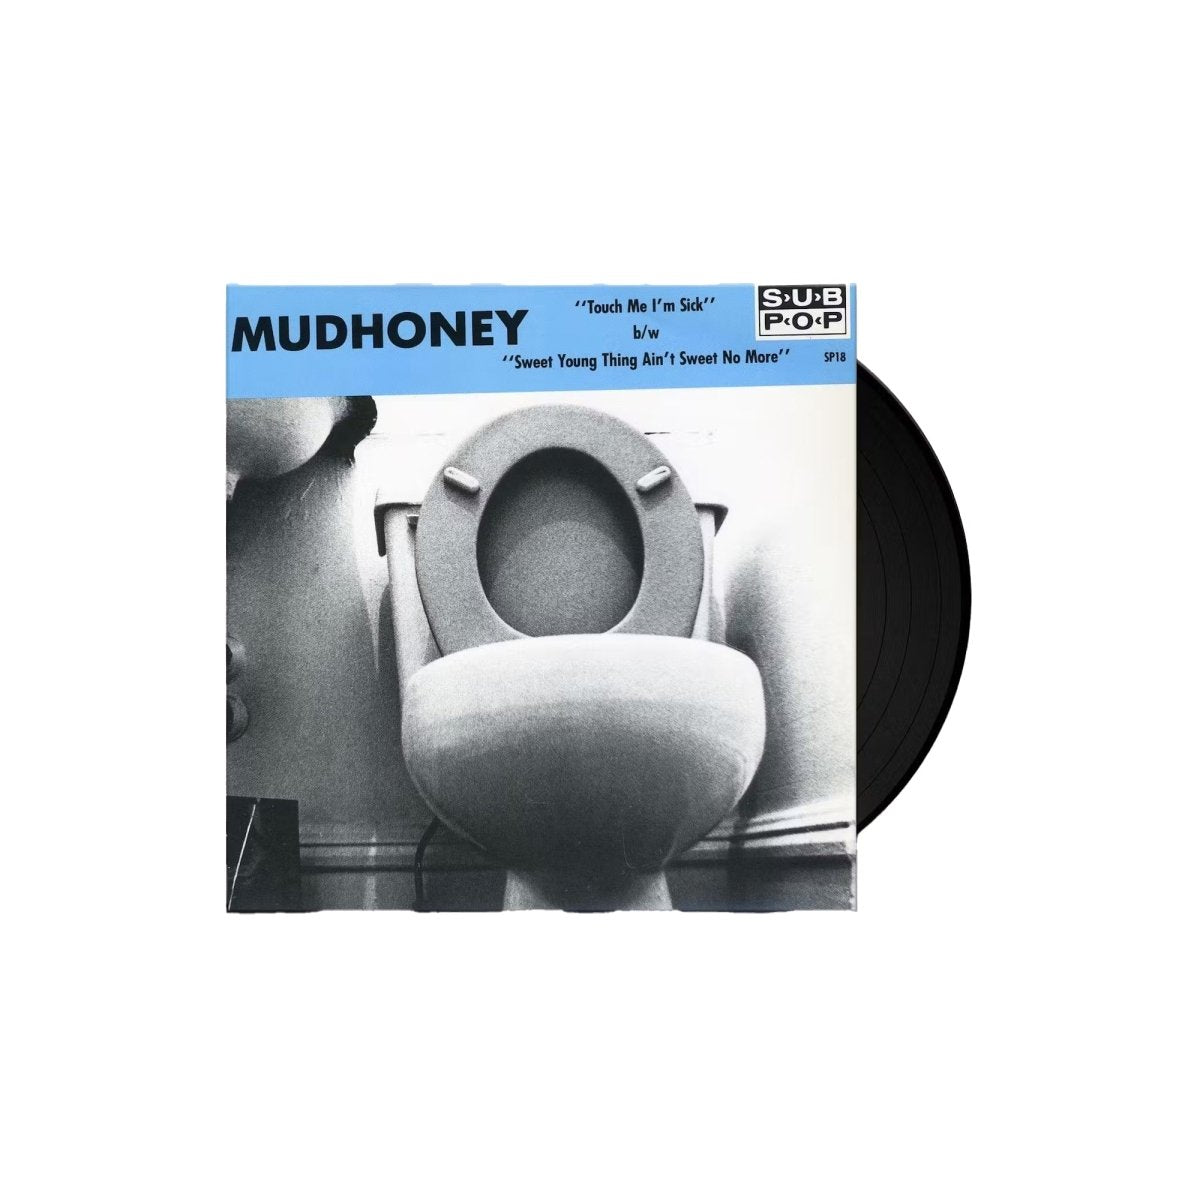 Mudhoney - Touch Me I'm Sick b/w Sweet Young Thing Ain't Sweet No More 7" Vinyl